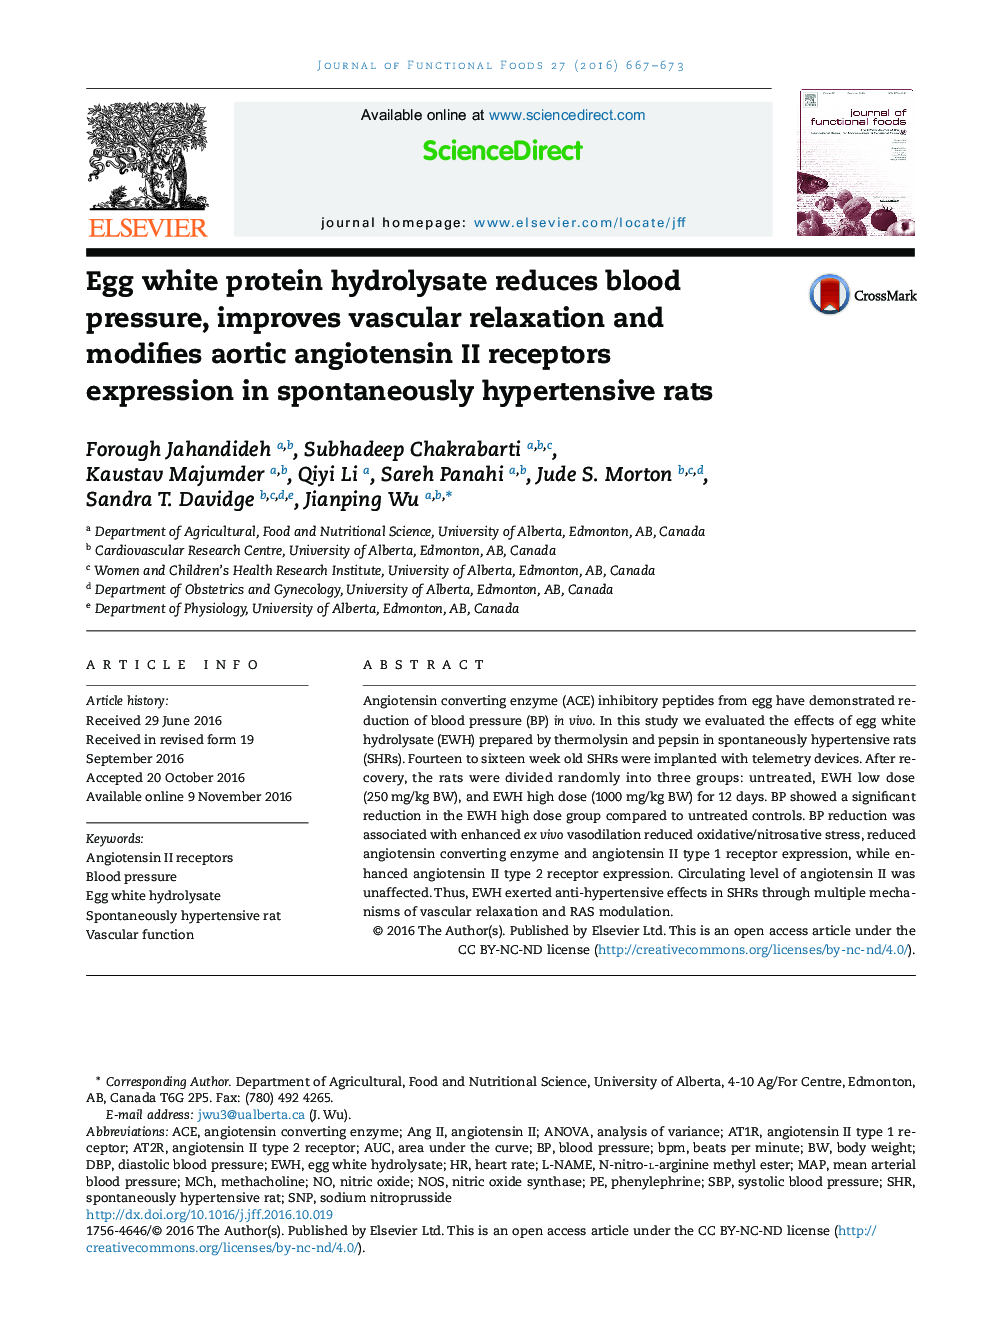 Egg white protein hydrolysate reduces blood pressure, improves vascular relaxation and modifies aortic angiotensin II receptors expression in spontaneously hypertensive rats